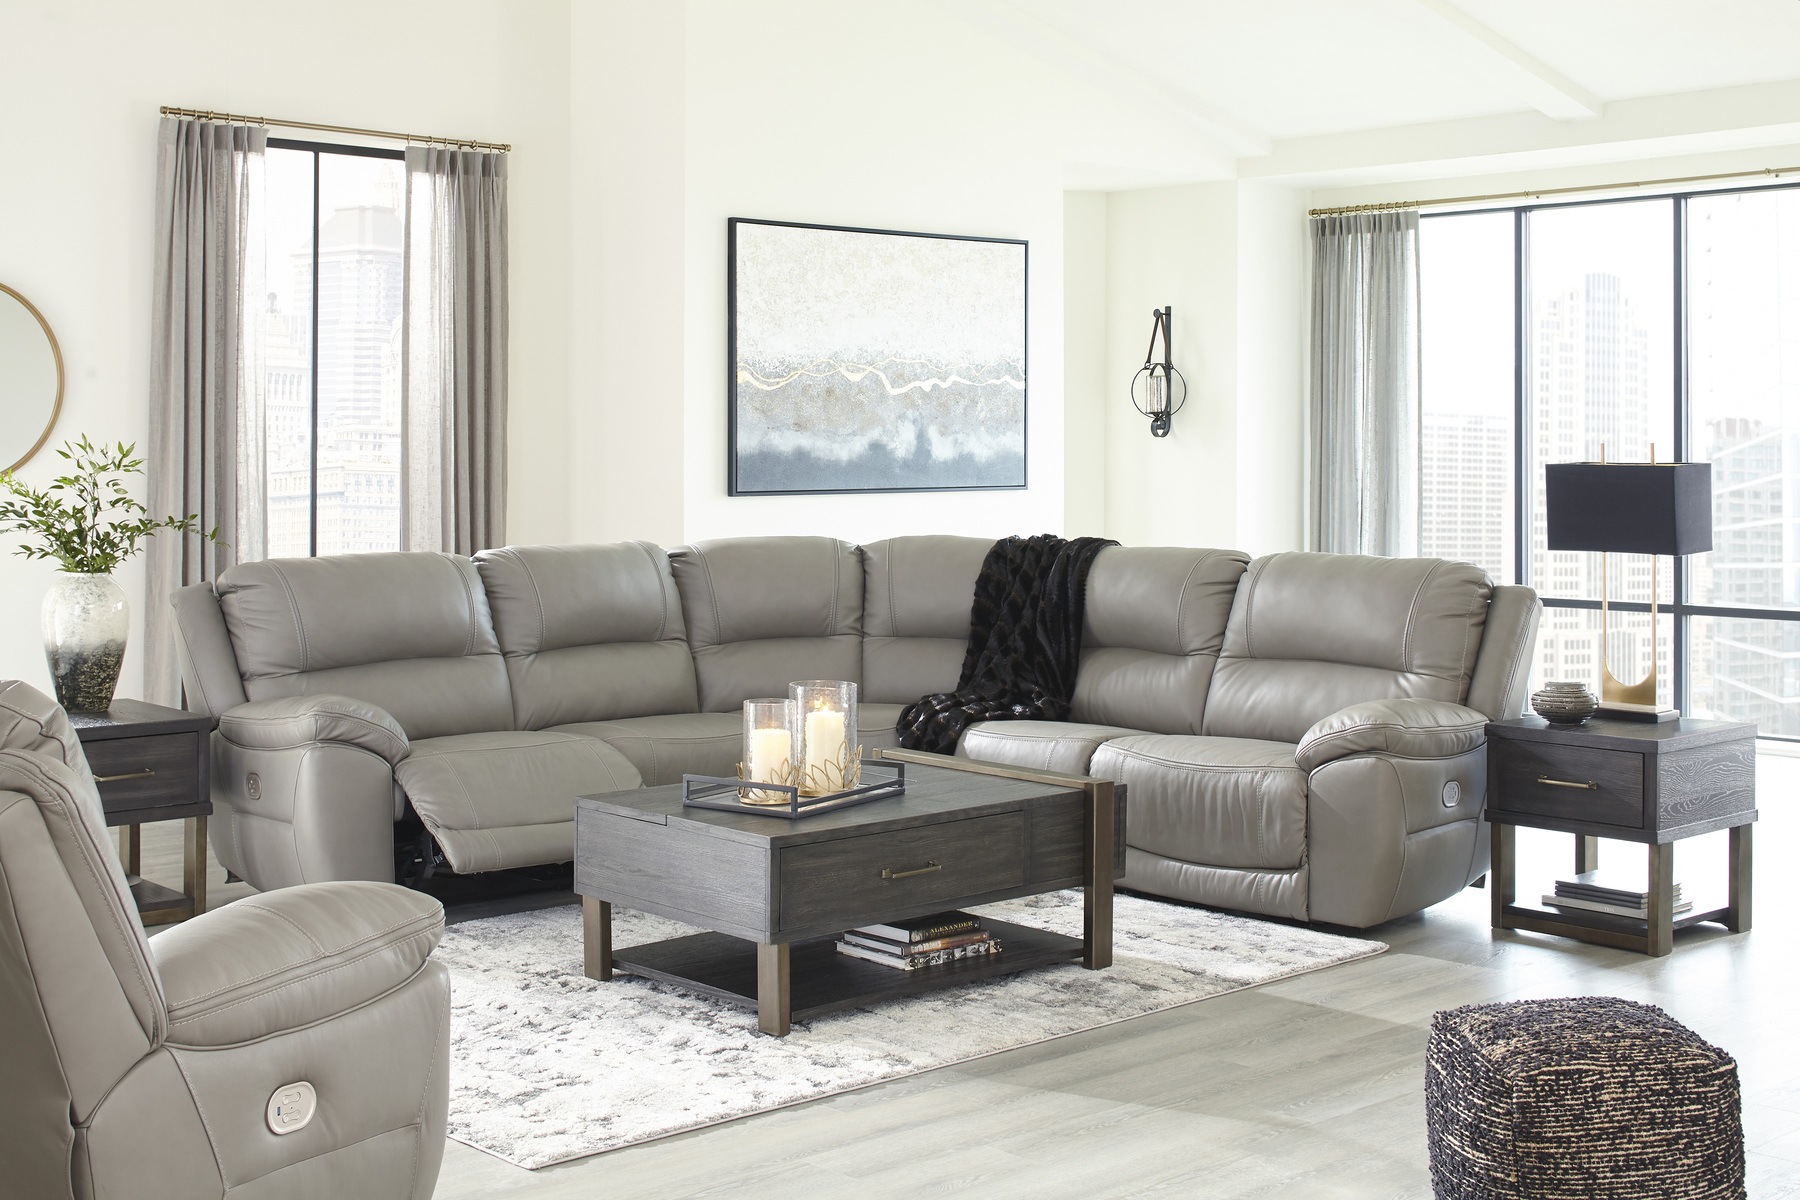 5 Piece Living Room Sectional Set